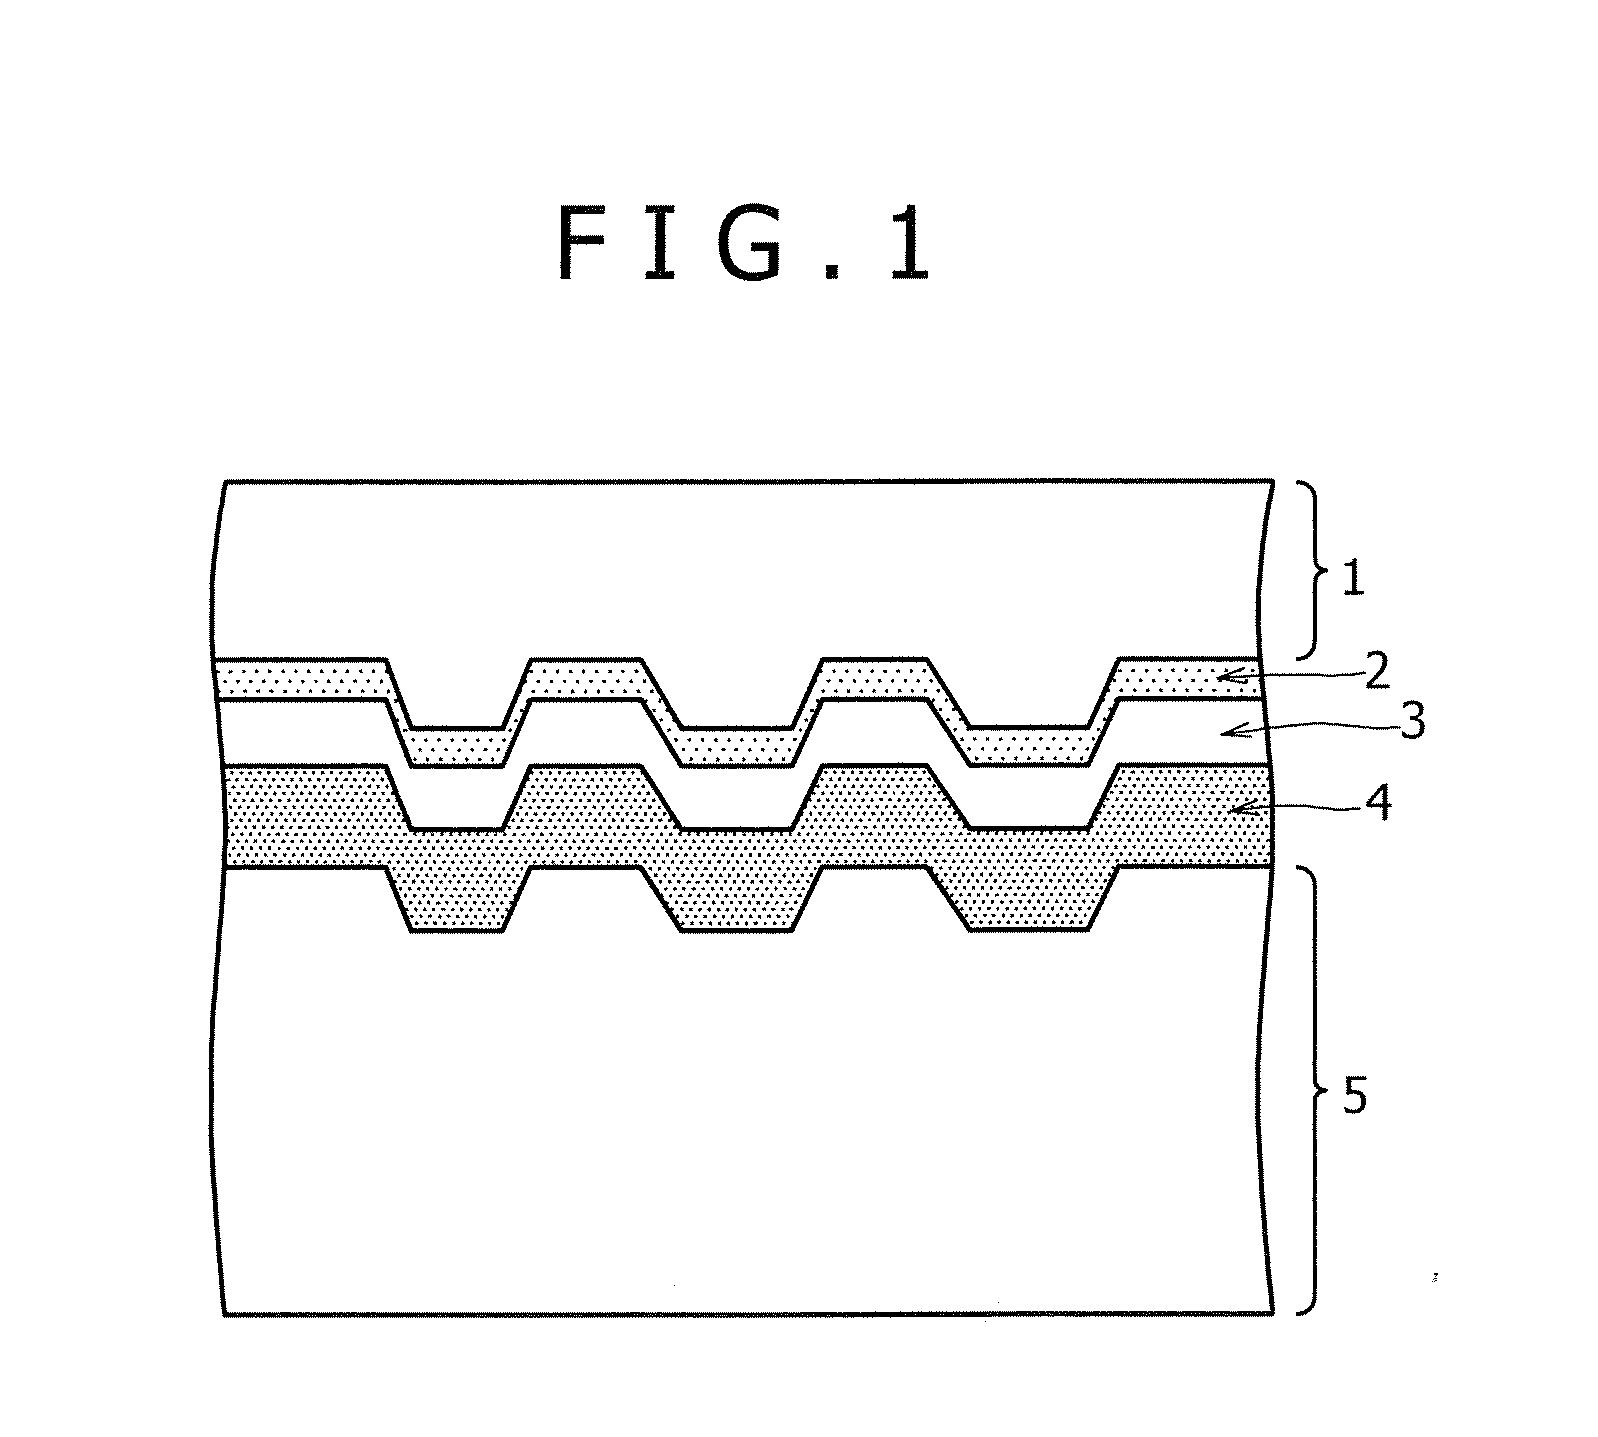 Silver alloy reflective films for optical information recording media, silver alloy sputtering targets therefor, and optical information recording media